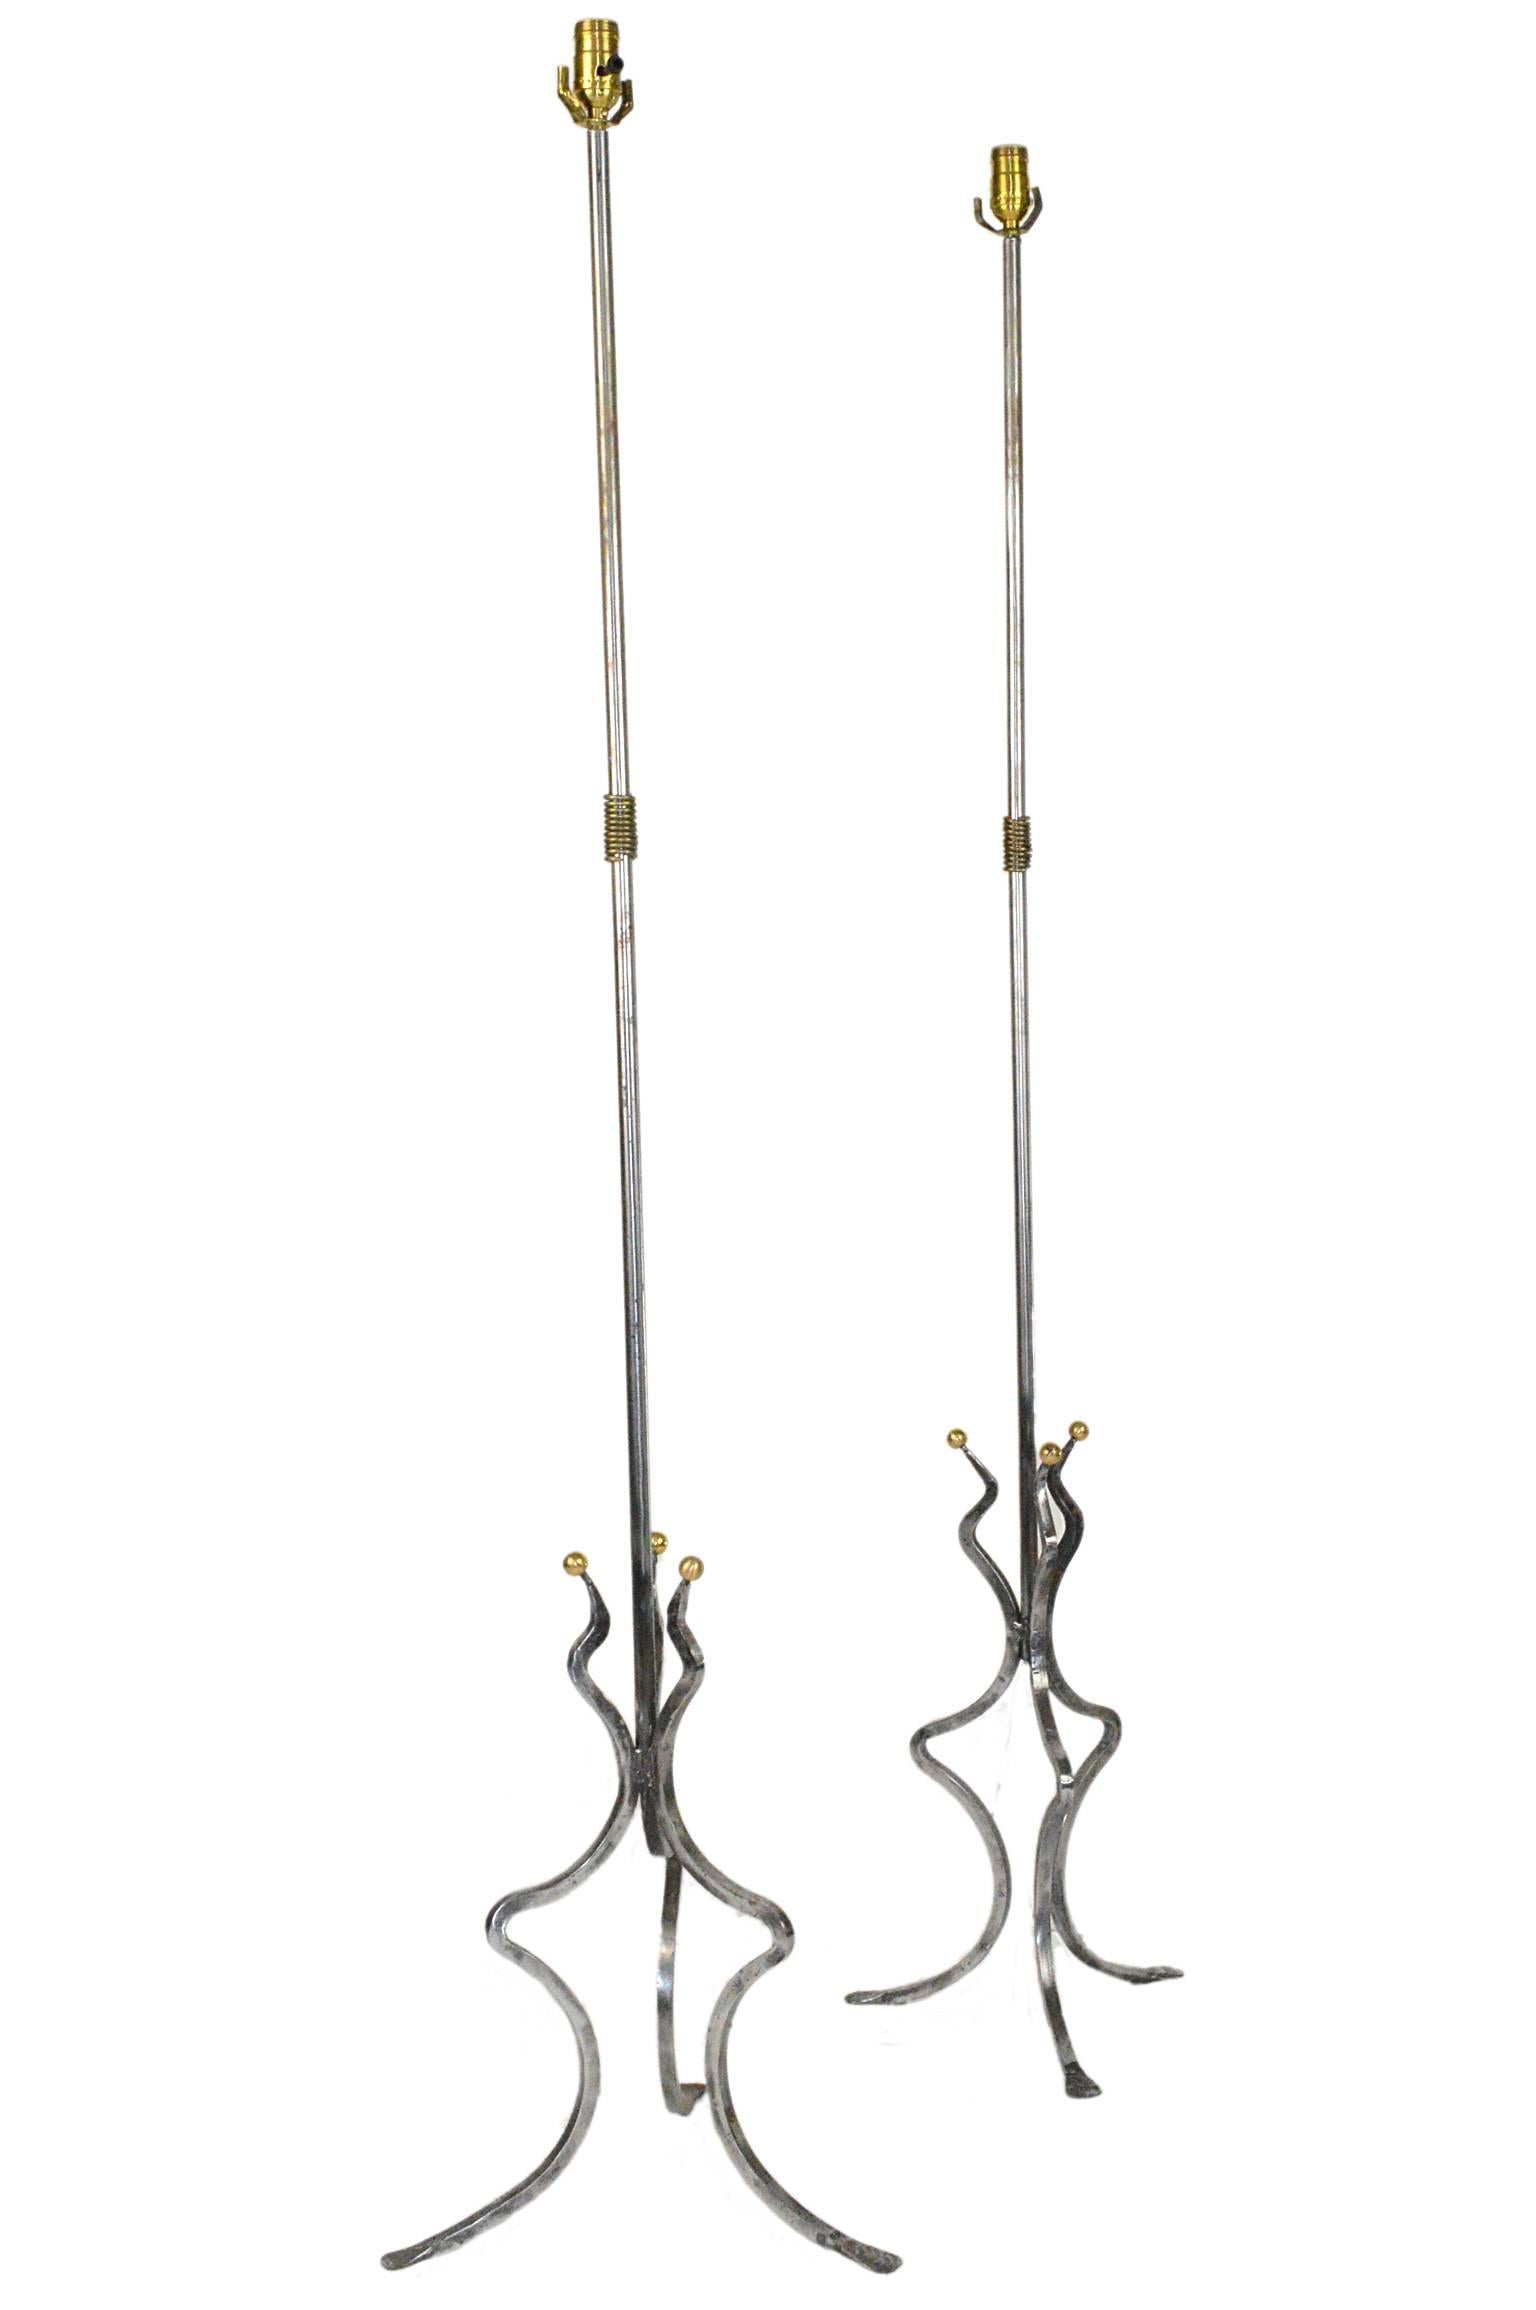 Pair mid century steel polished and brass accents floor lamps on tripod legs.

Smallest measures 62.5